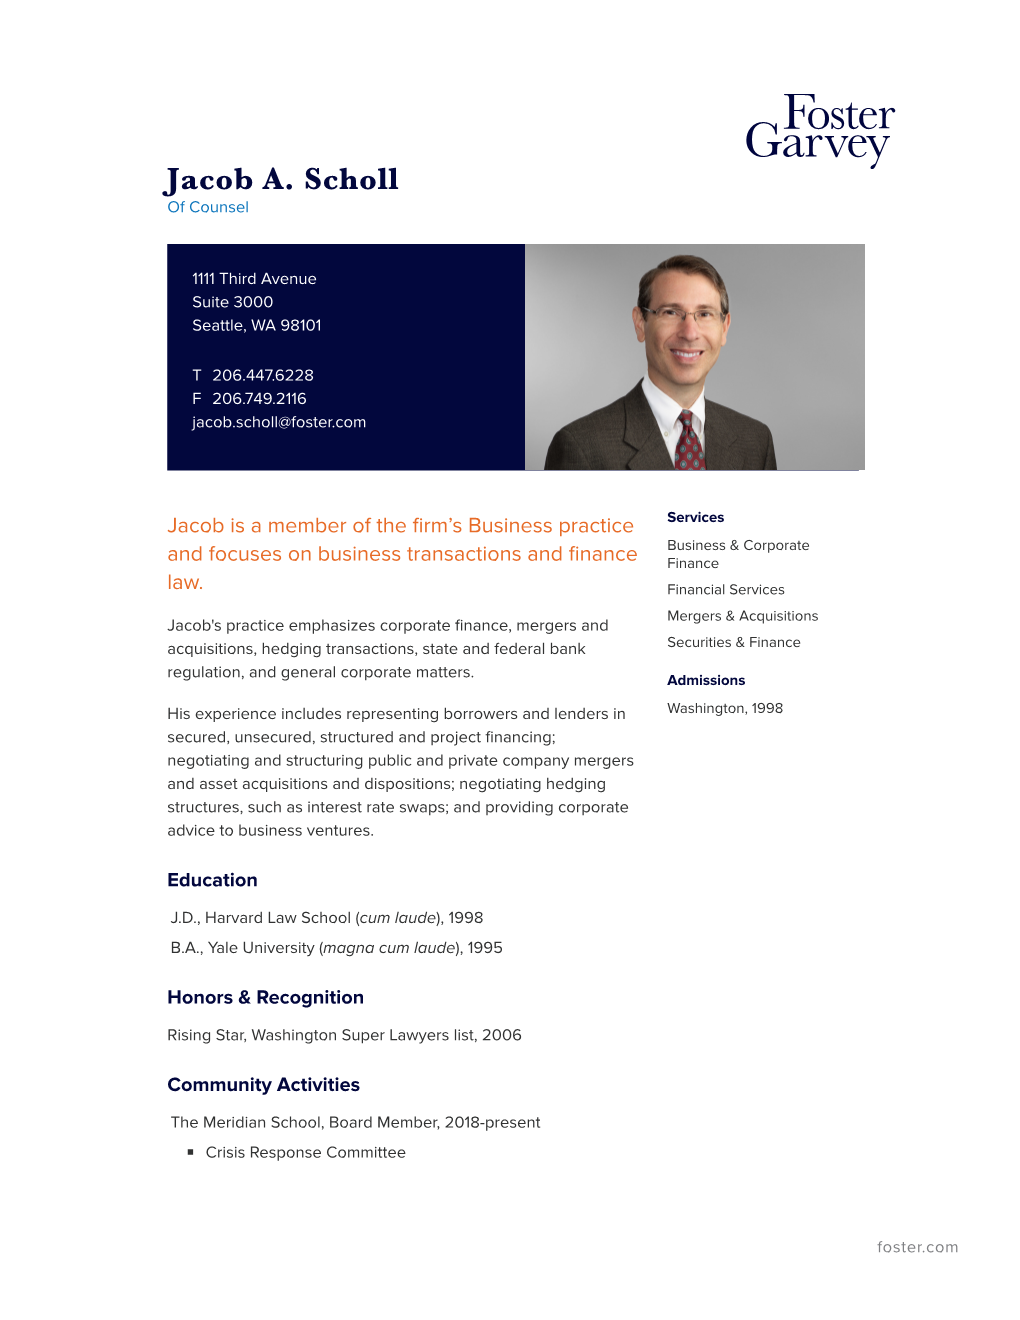 Jacob A. Scholl of Counsel